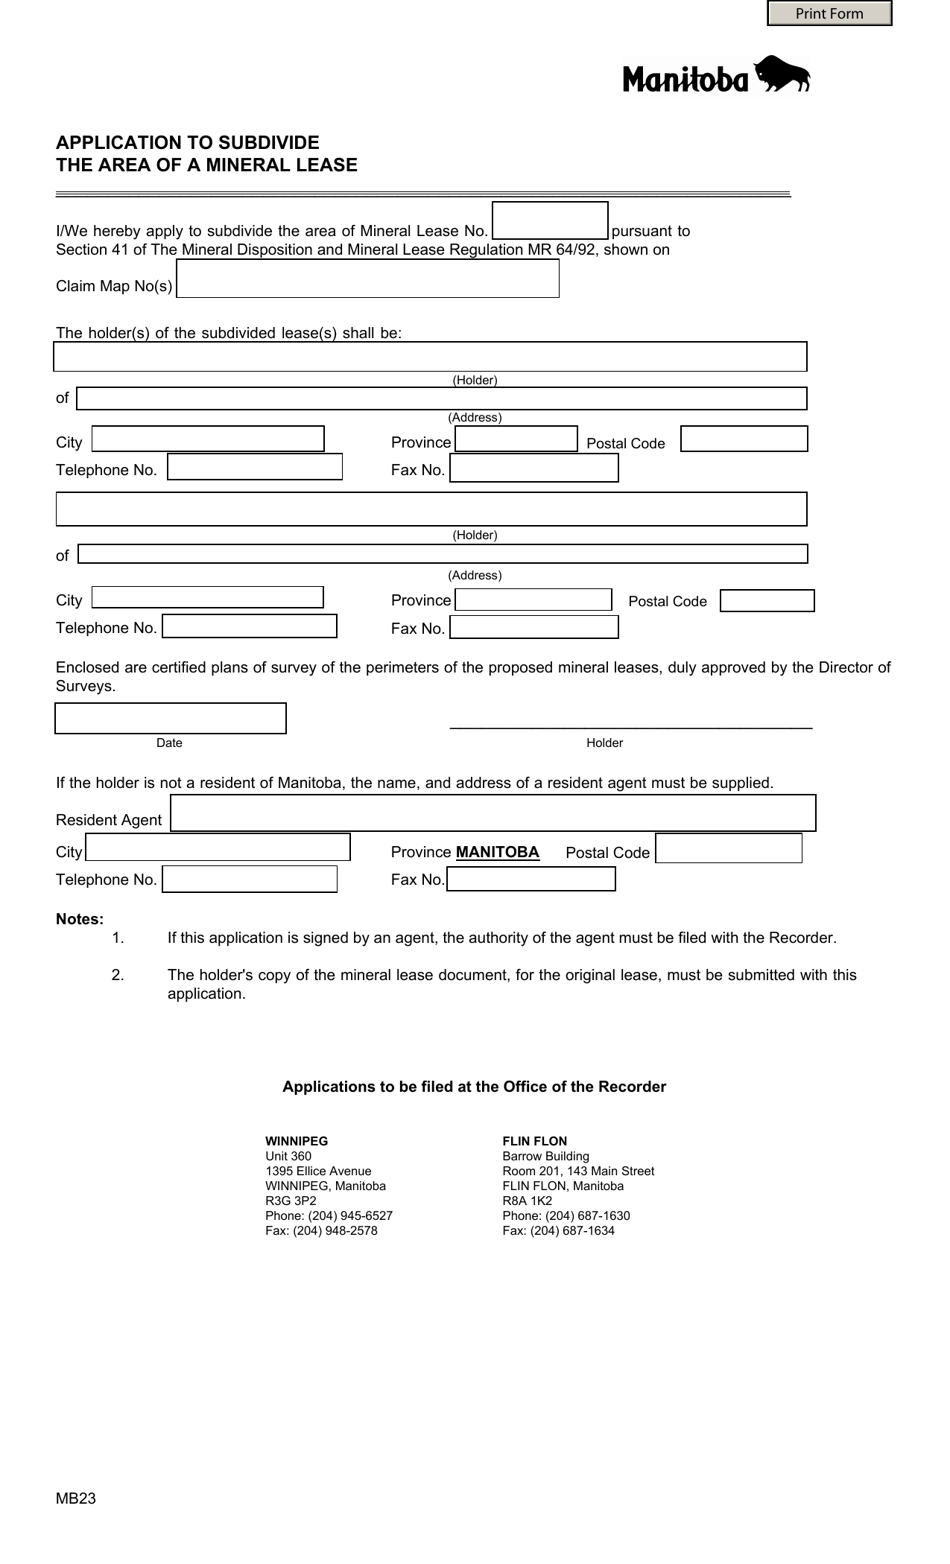 Form MB23 Application to Subdivide the Area of a Mineral Lease - Manitoba, Canada, Page 1